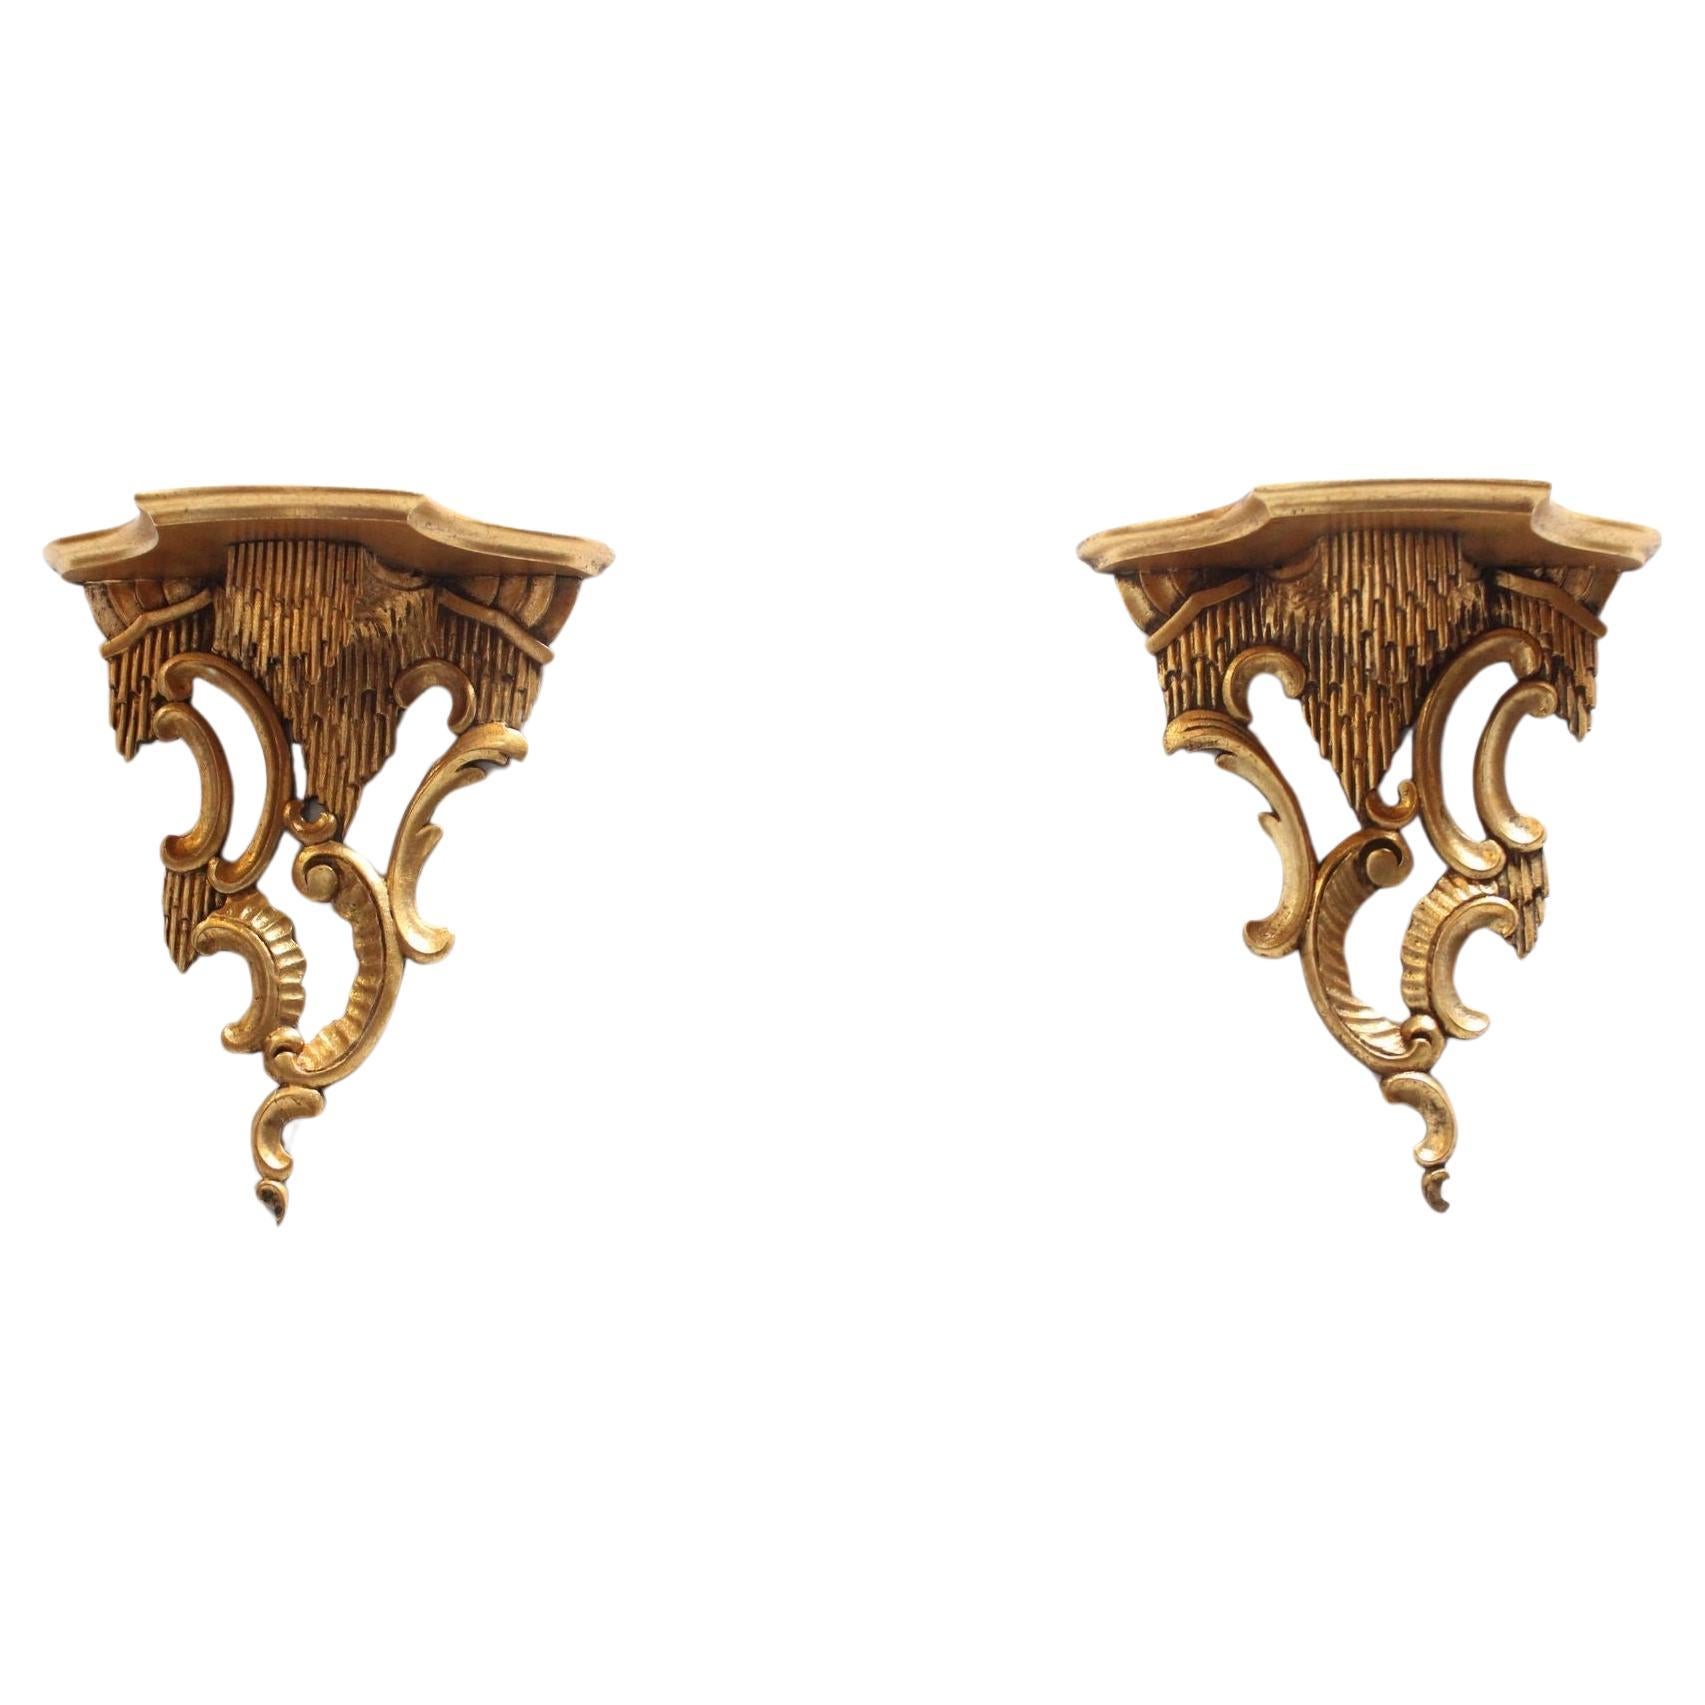 Pair of Italian Rococo-Style Rocaille Giltwood Wall Brackets For Sale